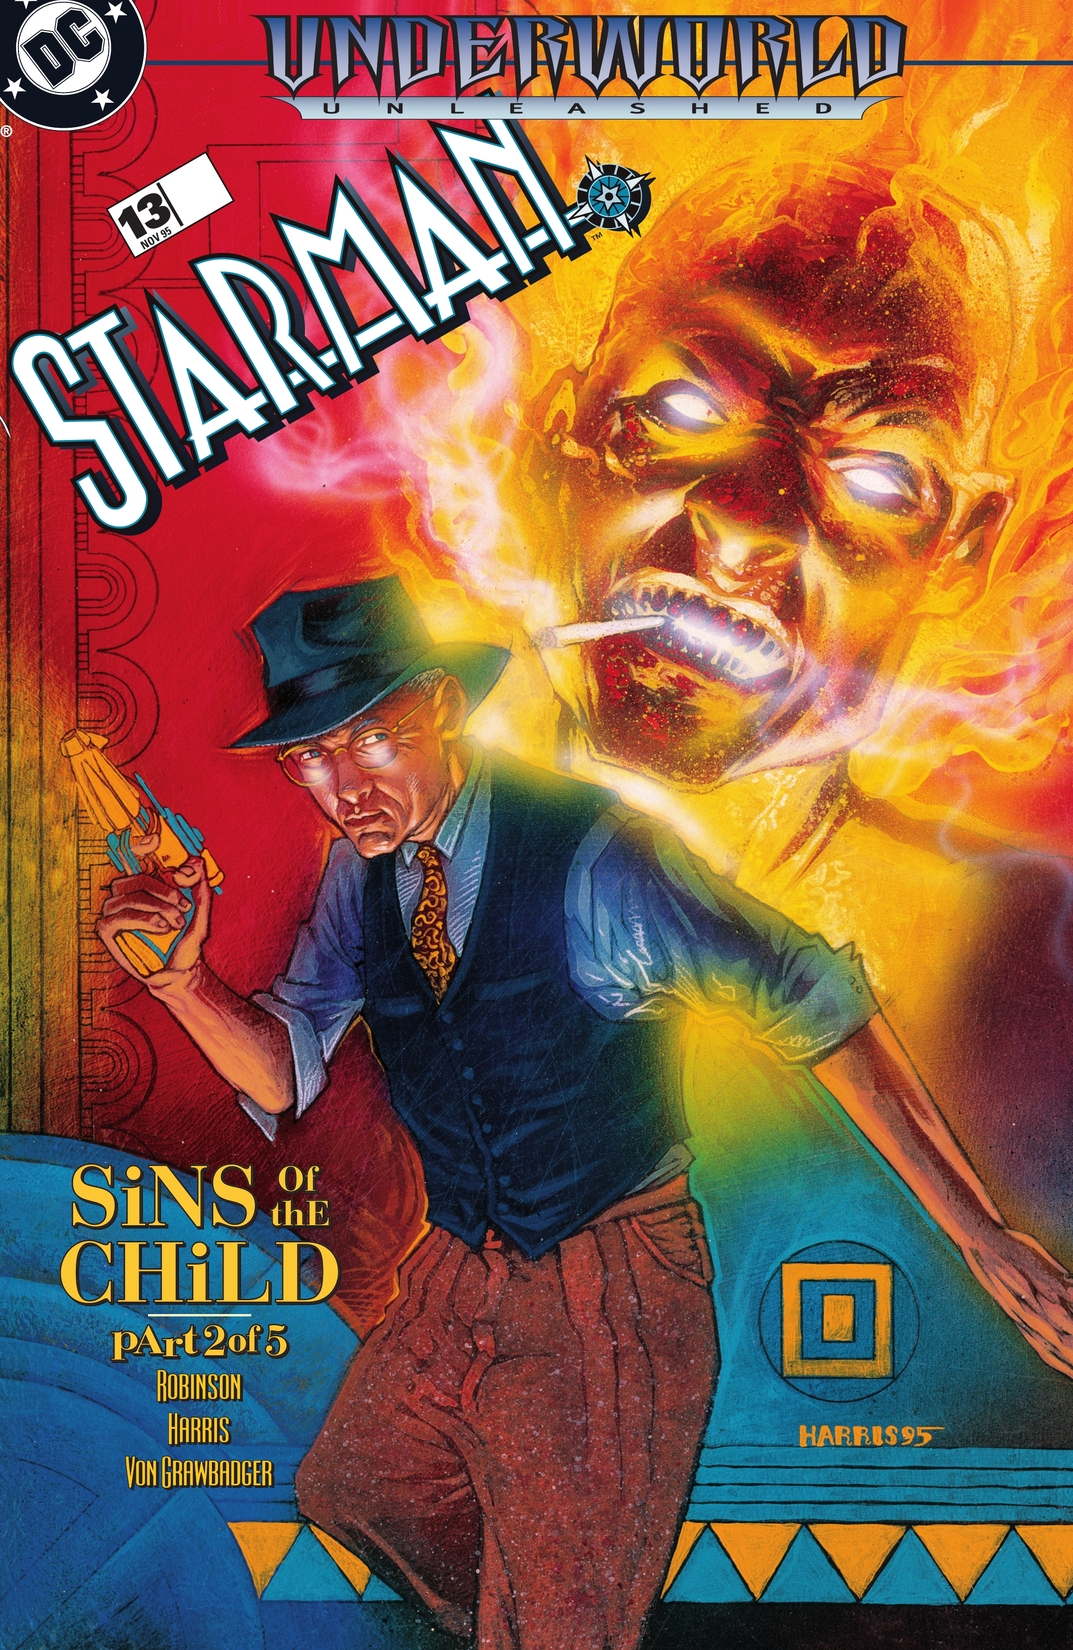 Starman (1994-) #13 preview images